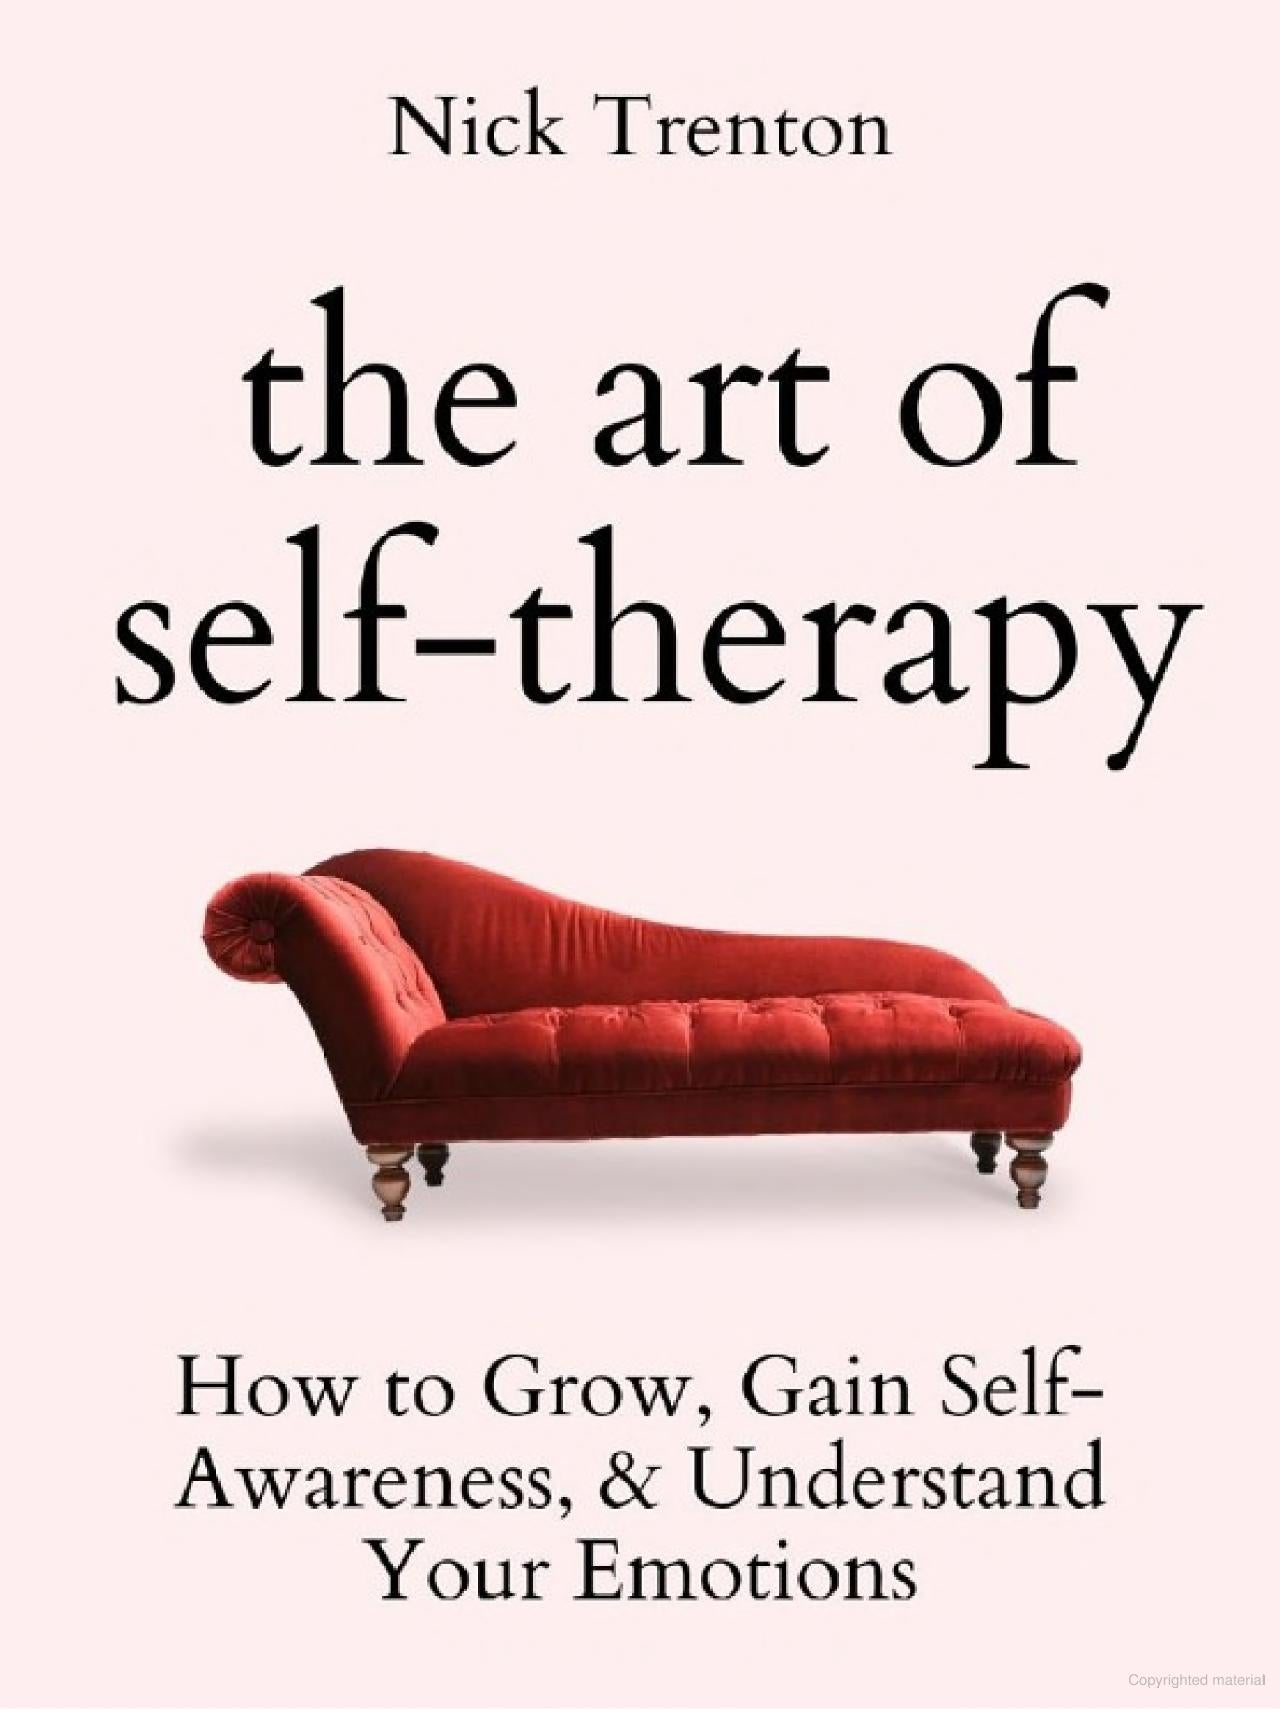 The Art of Self-Therapy: How to Grow, Gain Self-Awareness, and Understand Your Emotions
Book by Nick Trenton